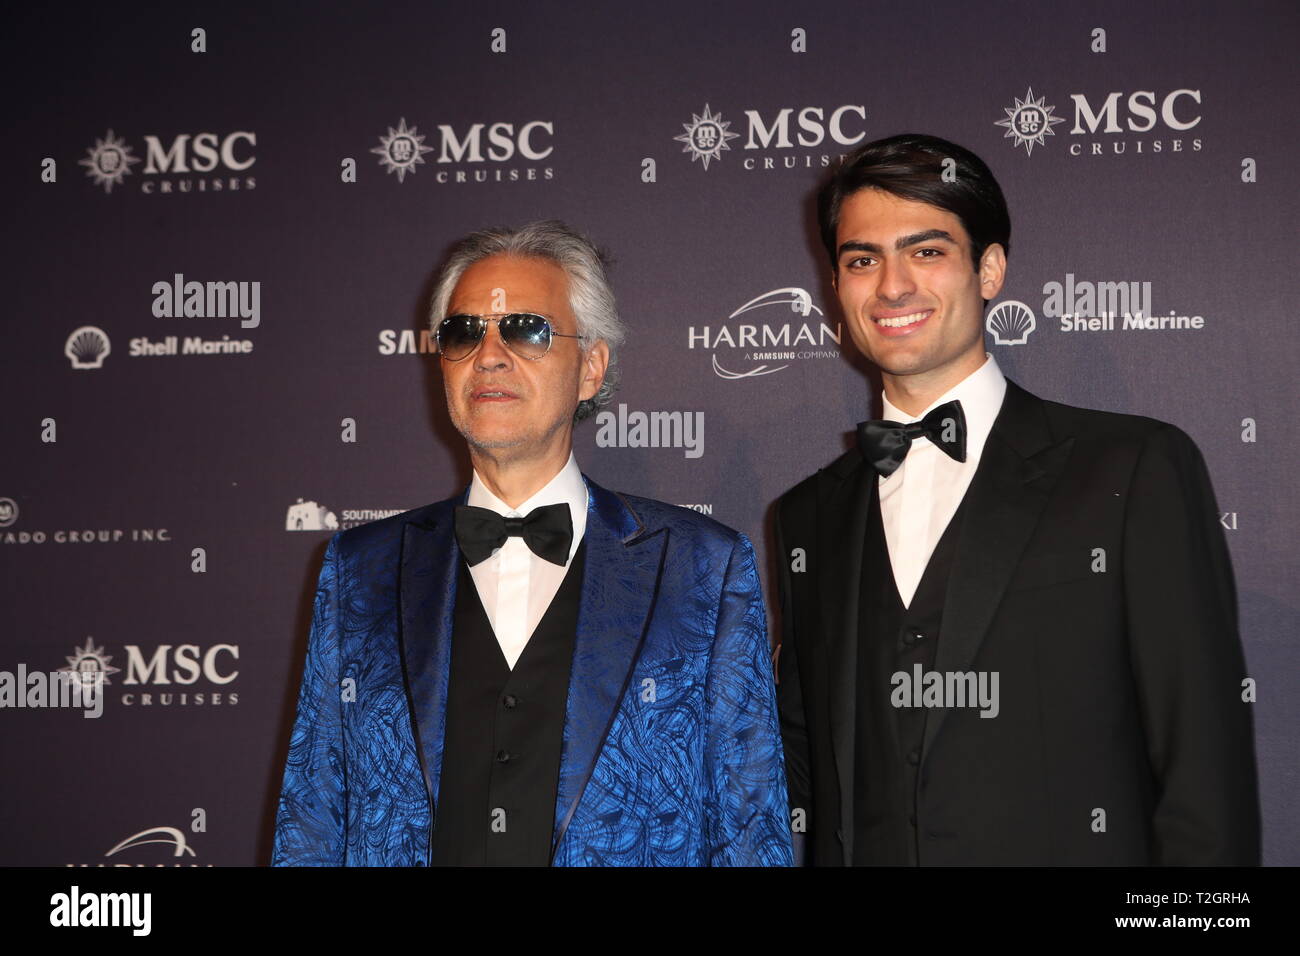 Andrea Bocelli's son Matteo shares rare pic of brother Amos as